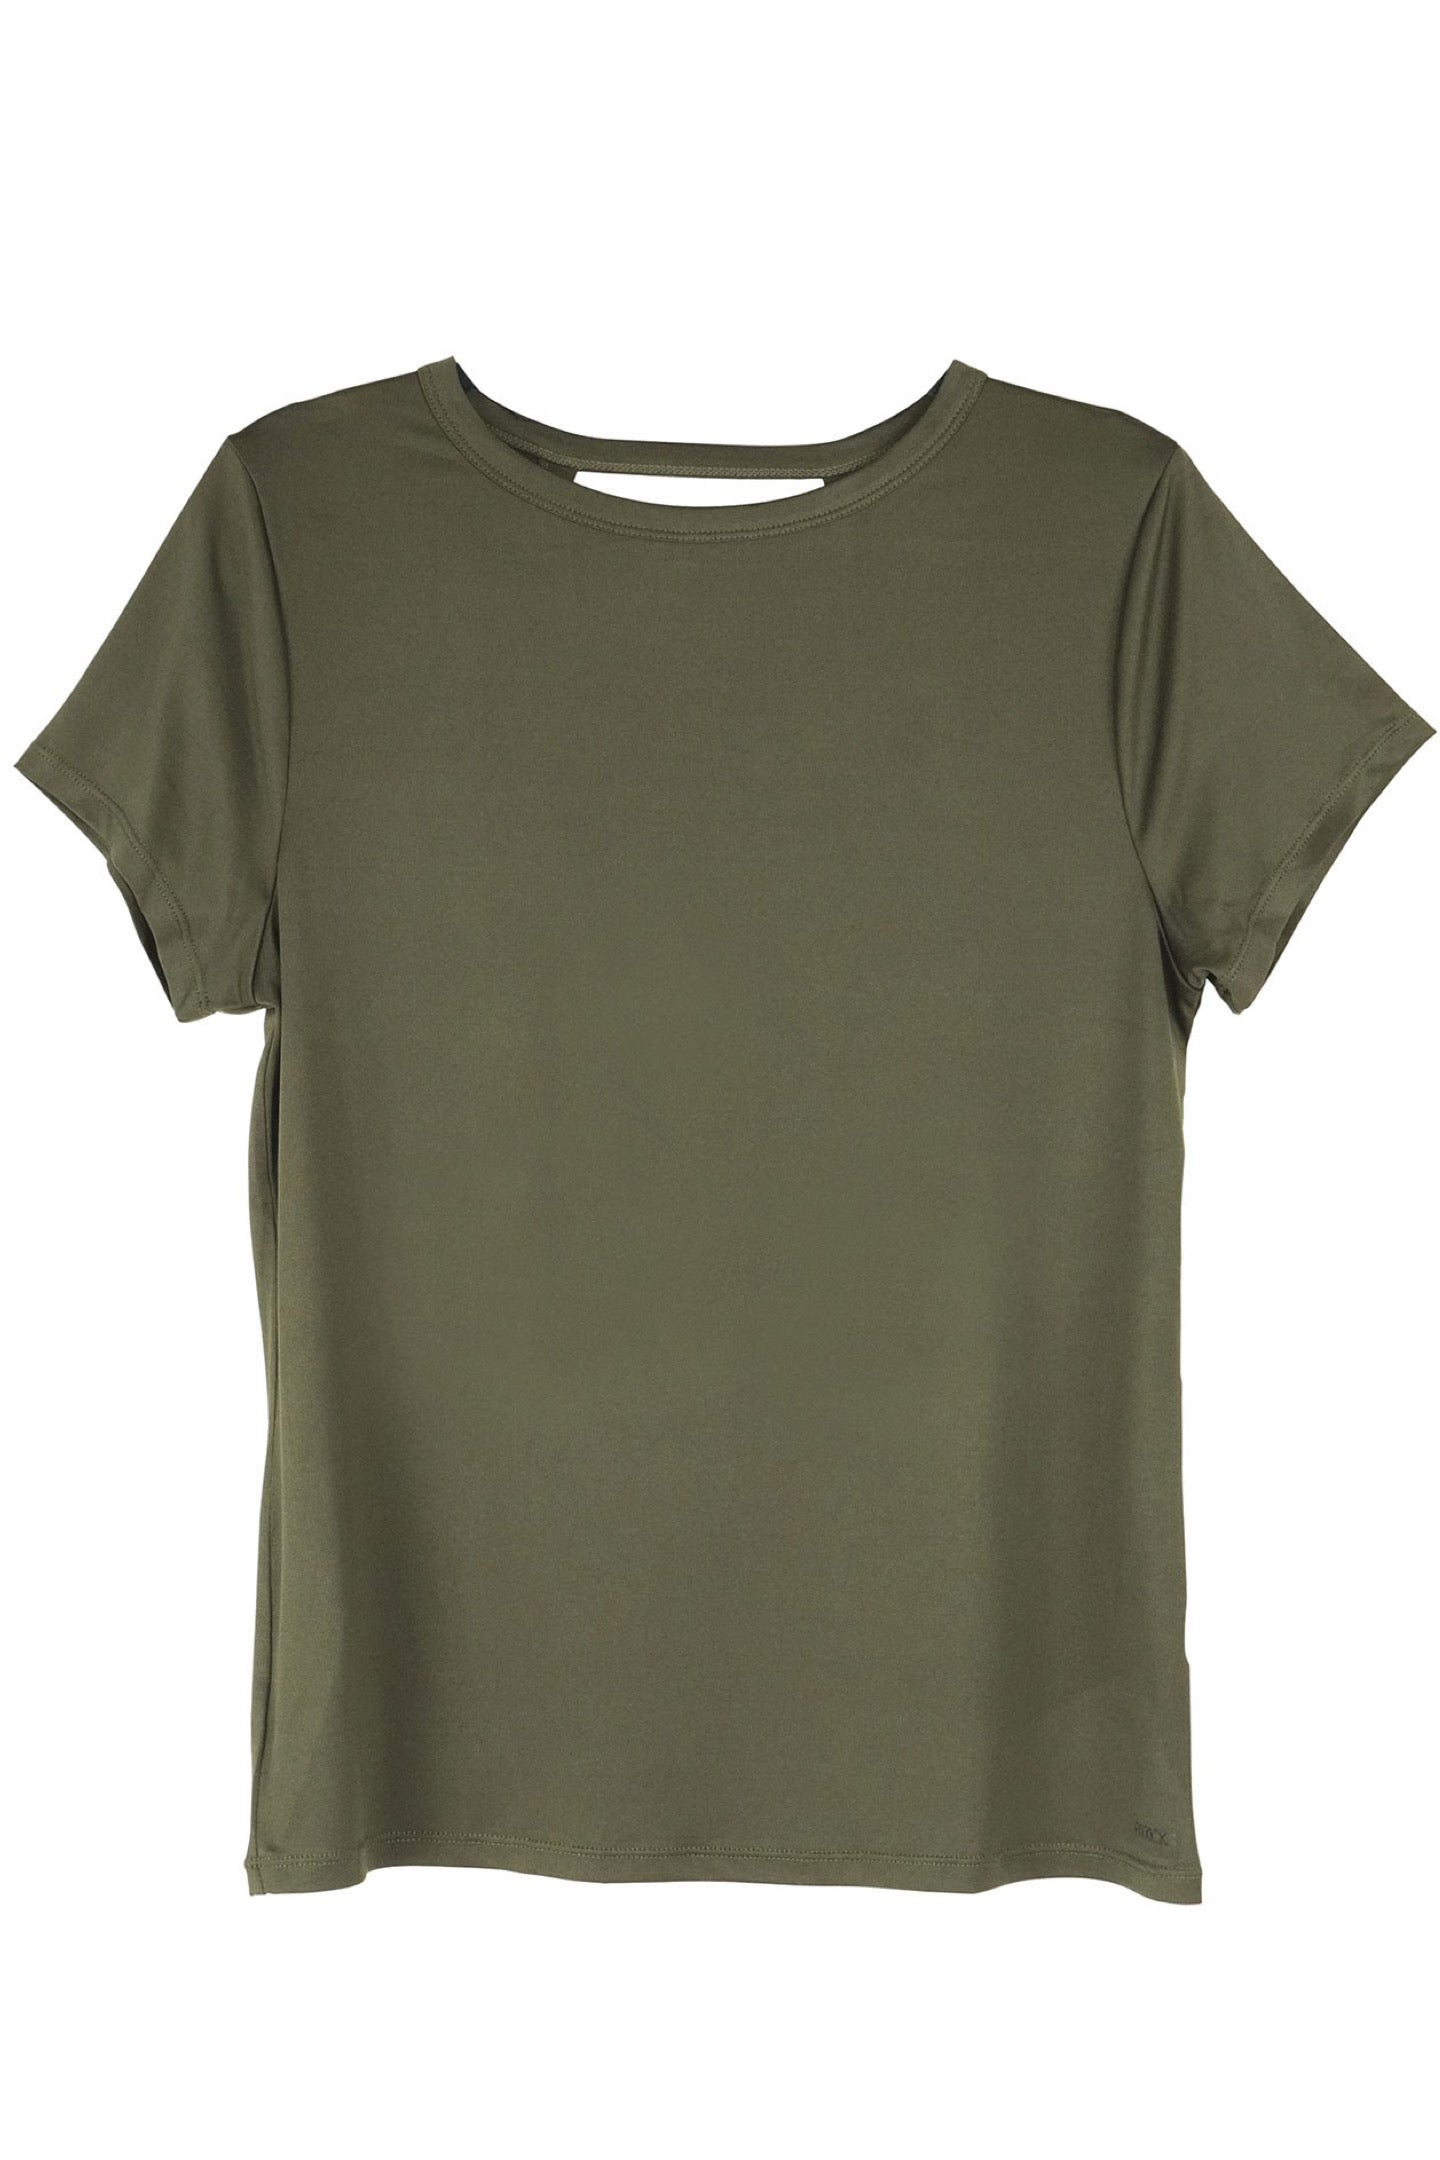 FITKICKS CROSSOVERS Active Lifestyle T-Shirt In Olive